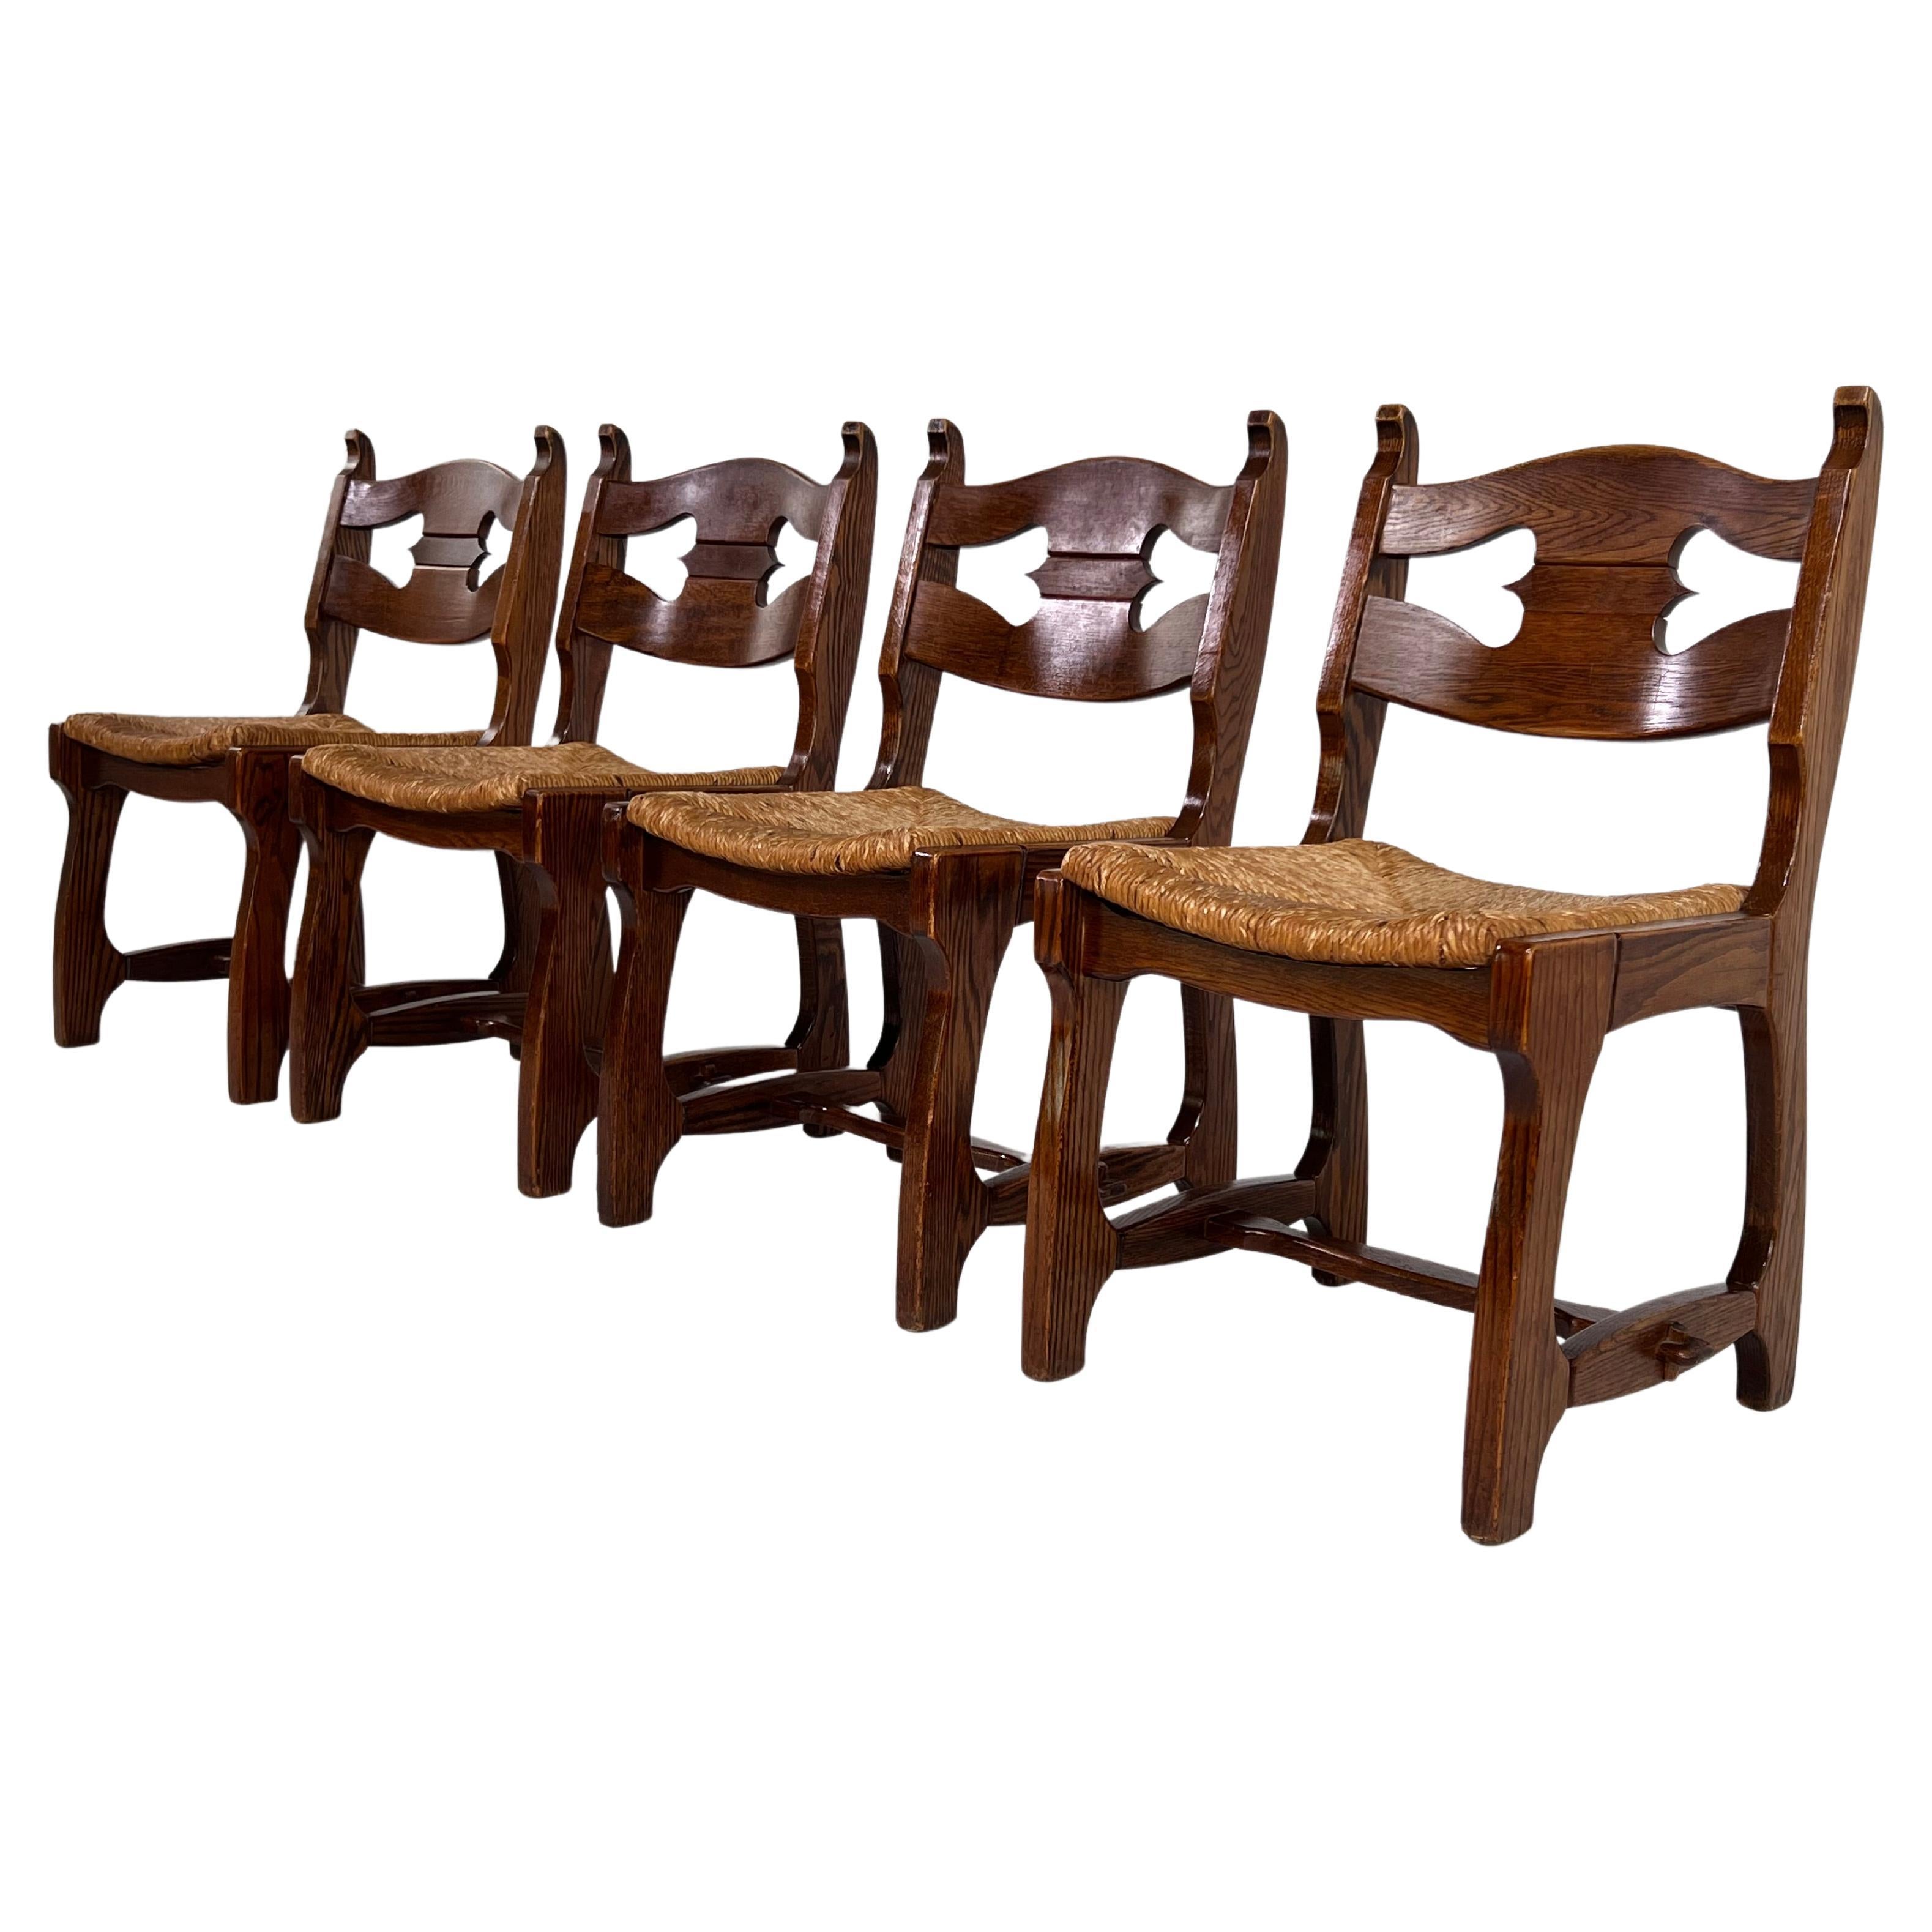 1950s Design Oak Wooden and Braided Straw Seats Set of 4 Chairs